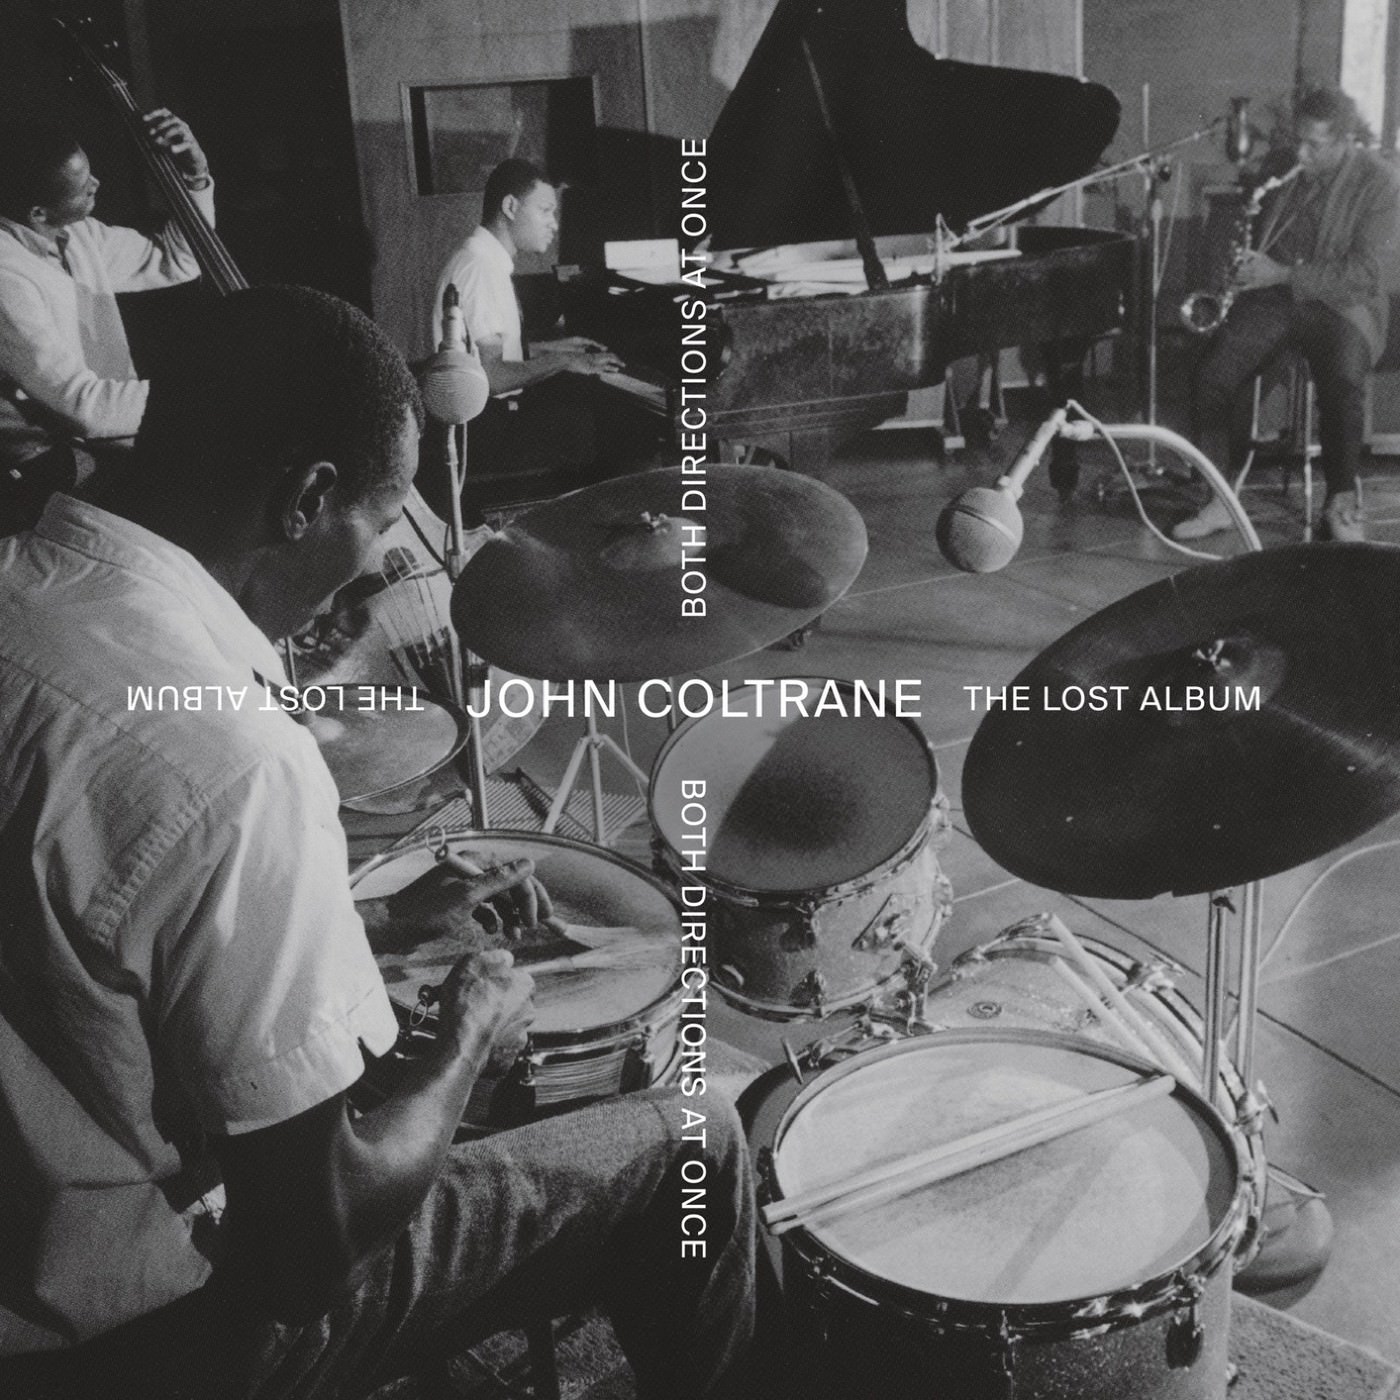 John Coltrane - Both Directions at Once: The Lost Album (Deluxe Edition) (2018) [FLAC 24bit/192kHz]